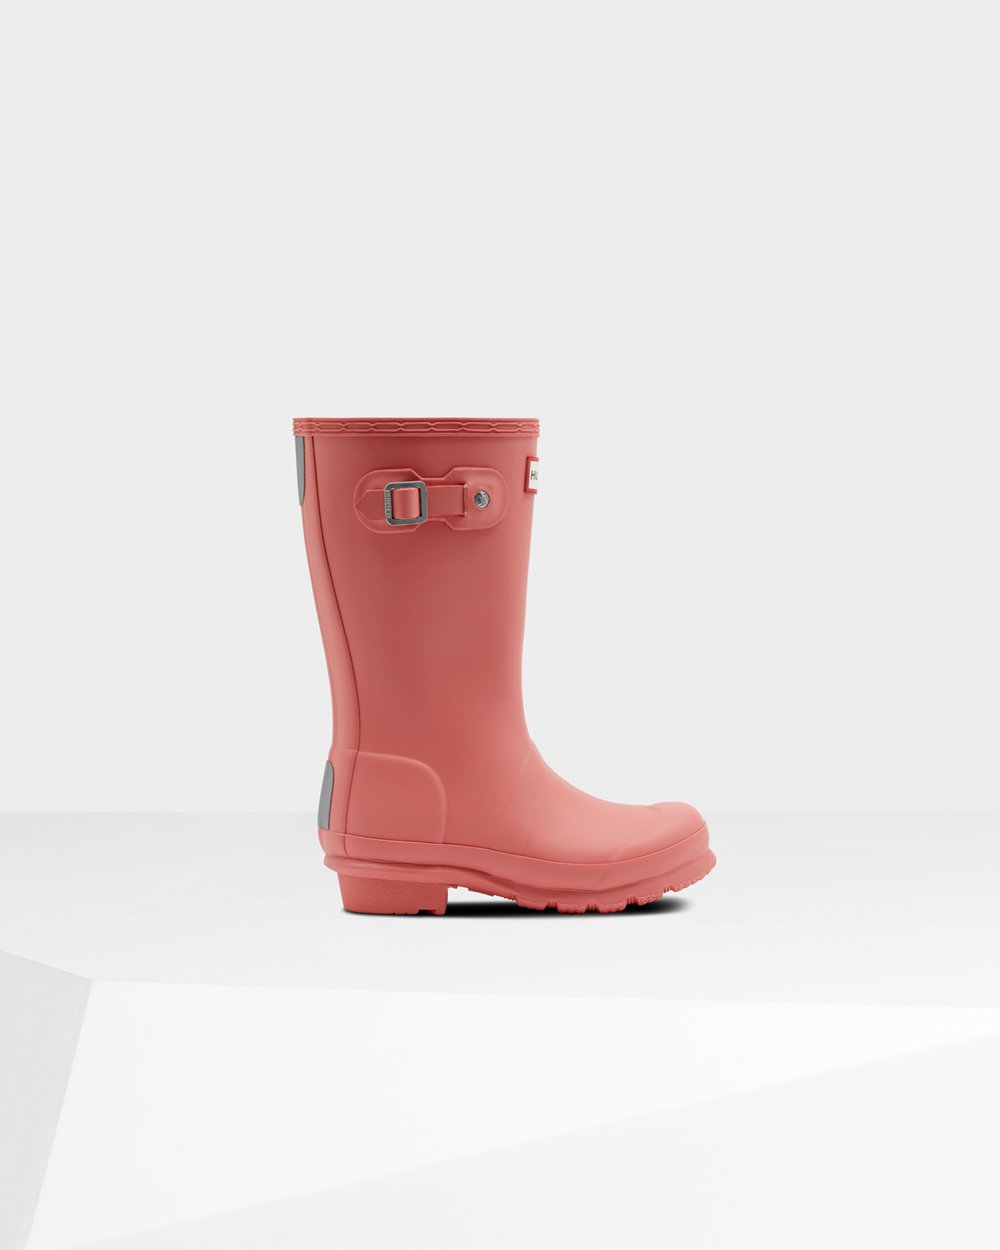 Hunter Rain Boots Sale - Hunter Boots South Africa - Hunter Boots Cape Town